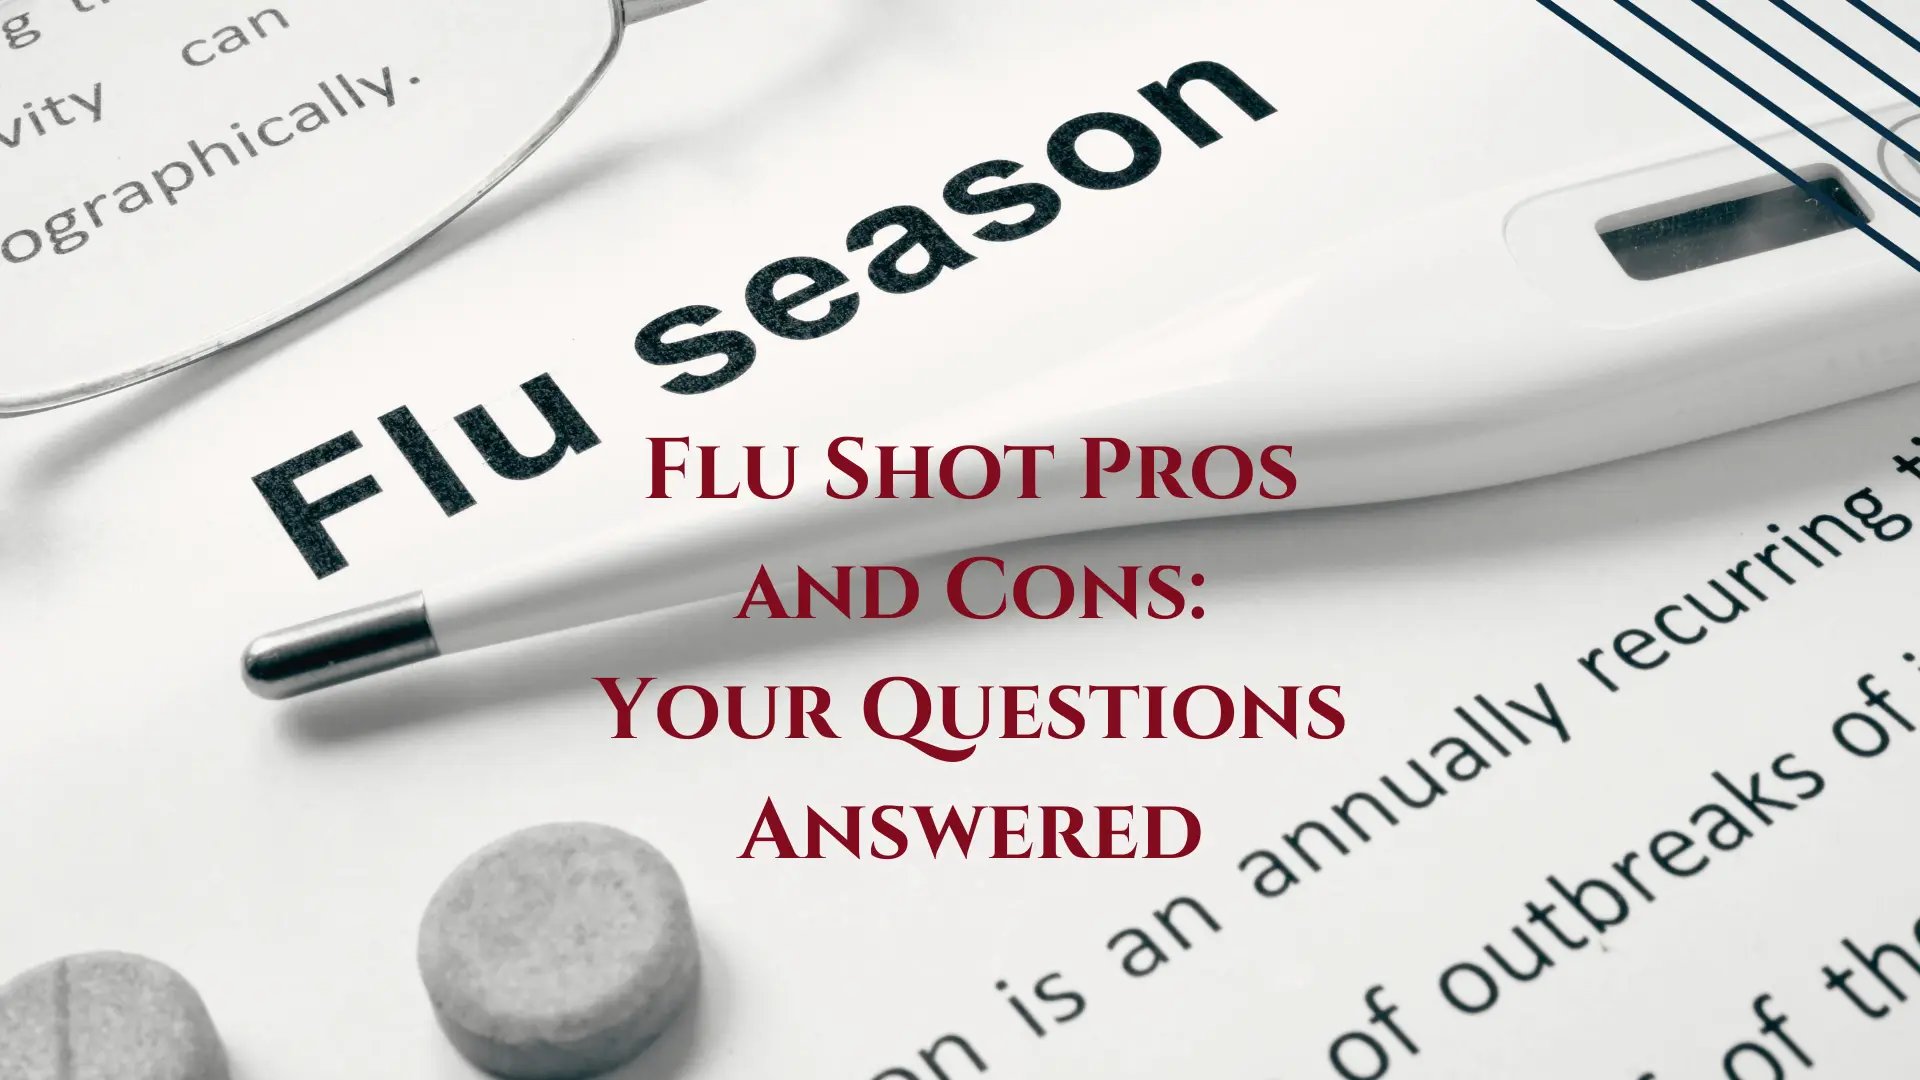 Flu Shot: A Guide to the Benefits and Risks